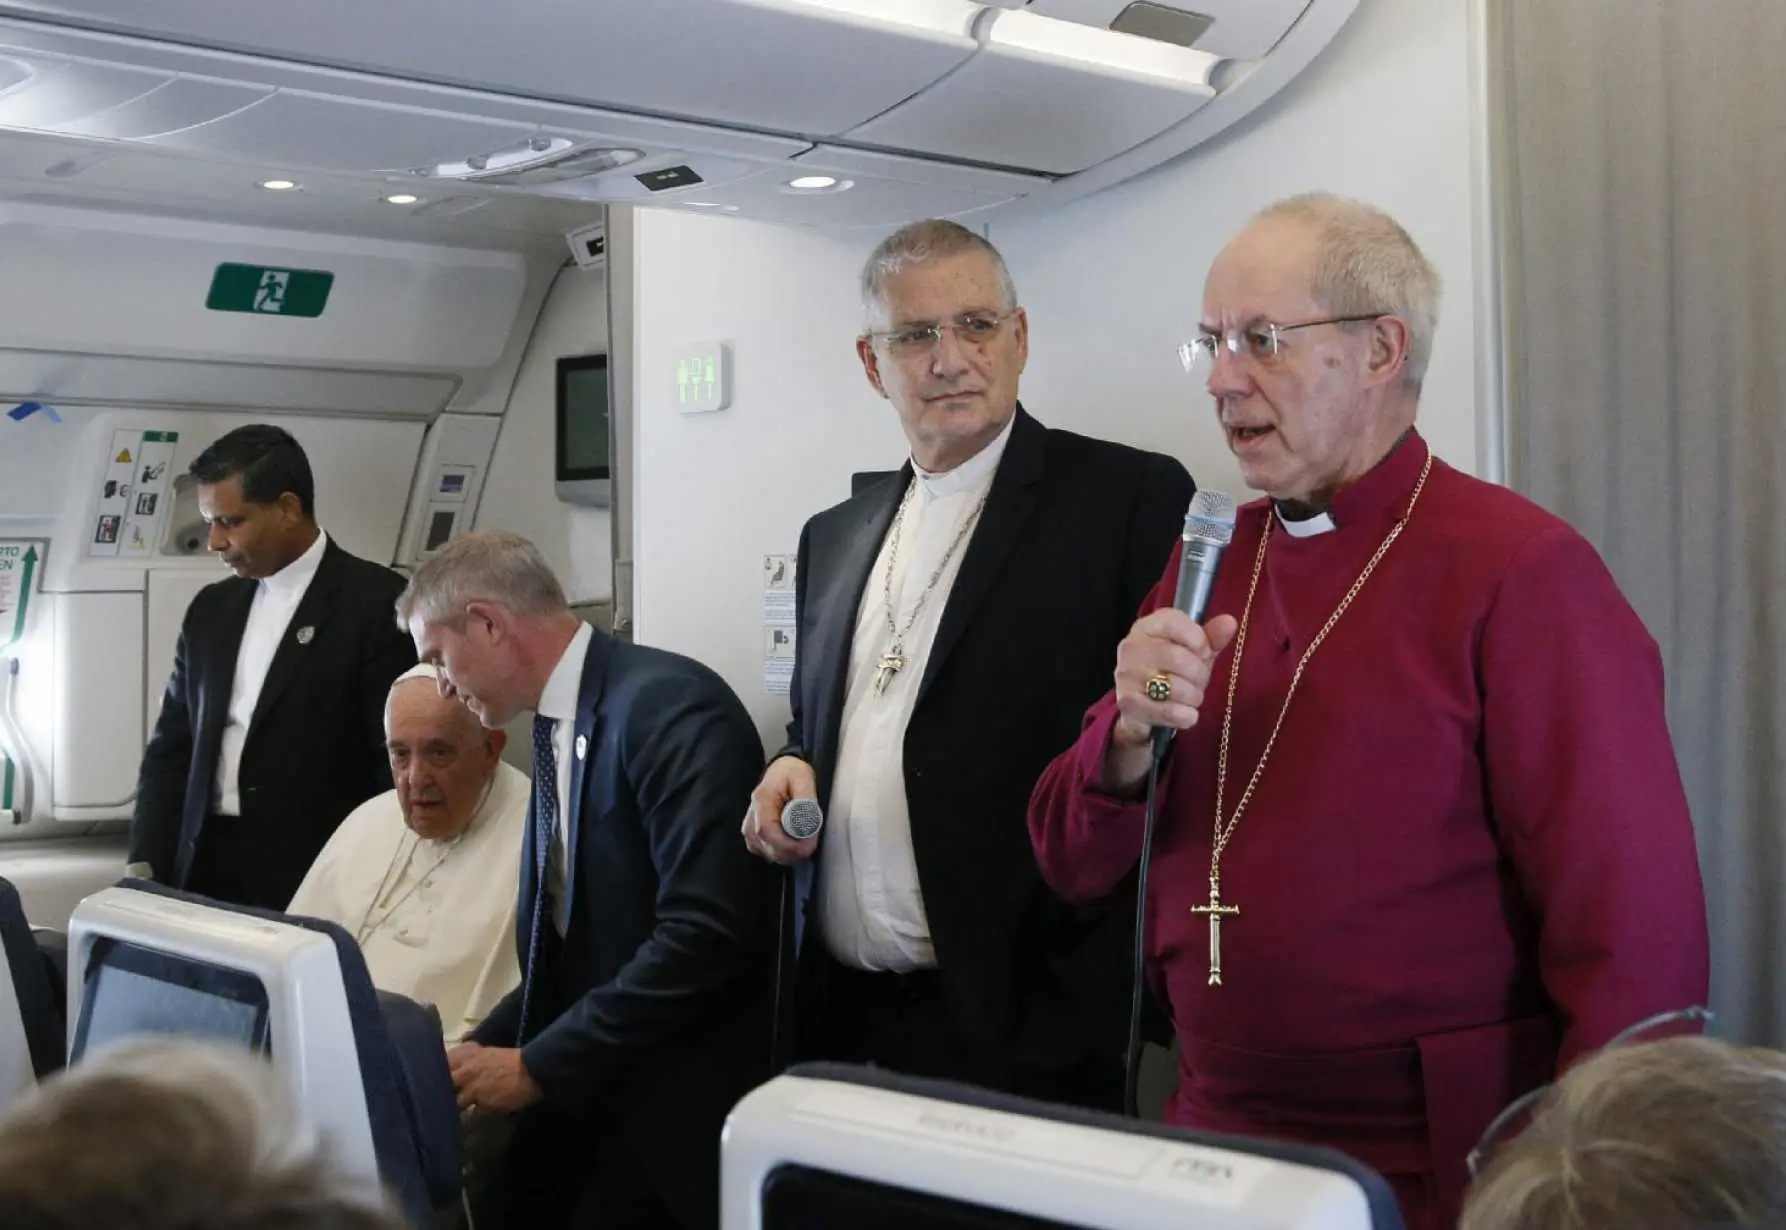 Anglican Archbishop Justin Welby, right, stands by Rev. Iain Greenshields, moderator of the Presbyterian Church of Scotland, and Pope Francis as he speaks to journalists aboard the flight from Juba, South Sudan, to Rome